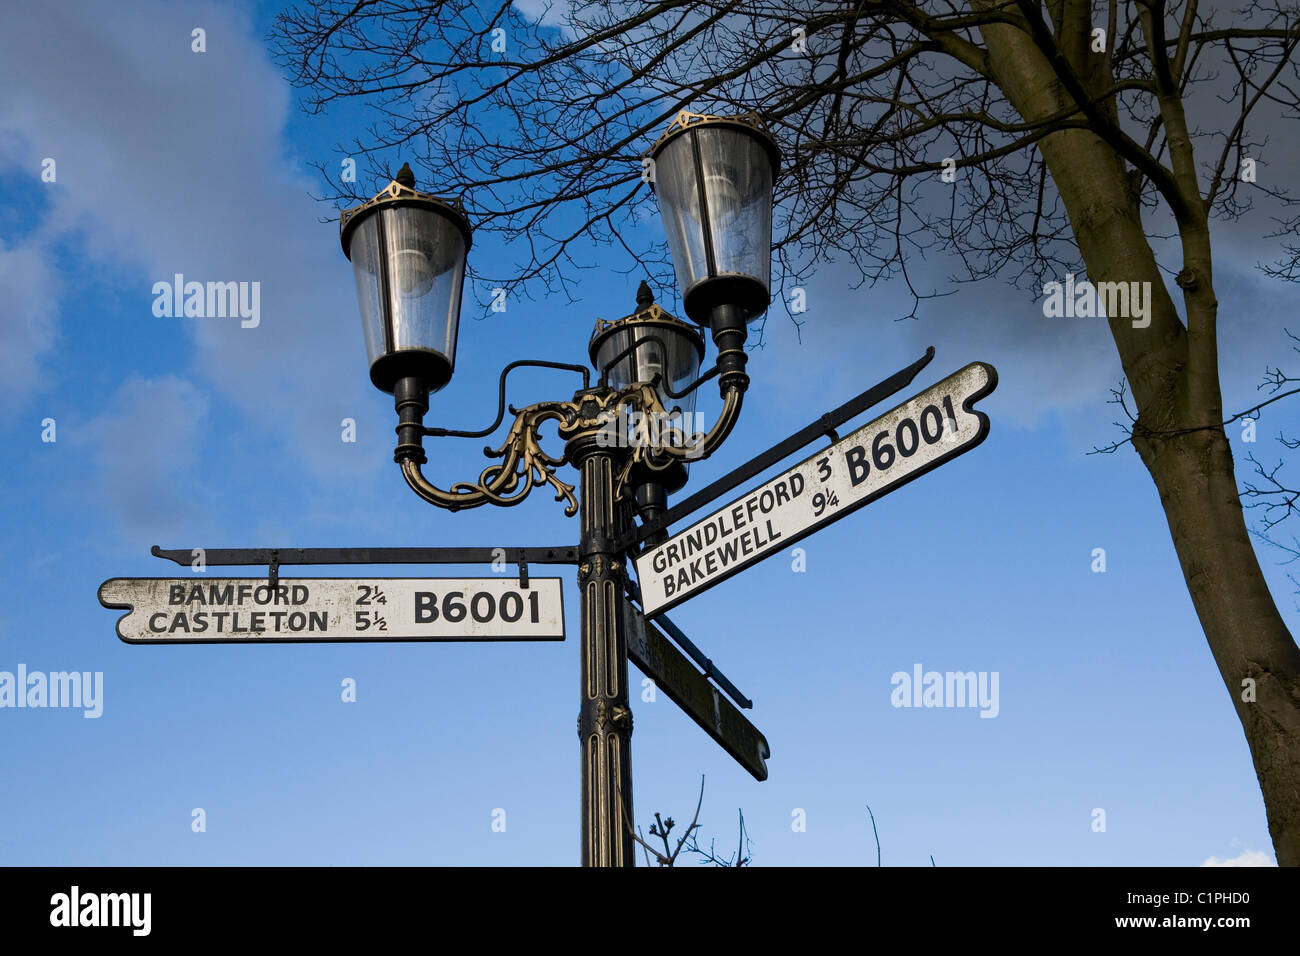 England, Derbyshire, Hathersage, road signs on Victorian lamppost Stock Photo